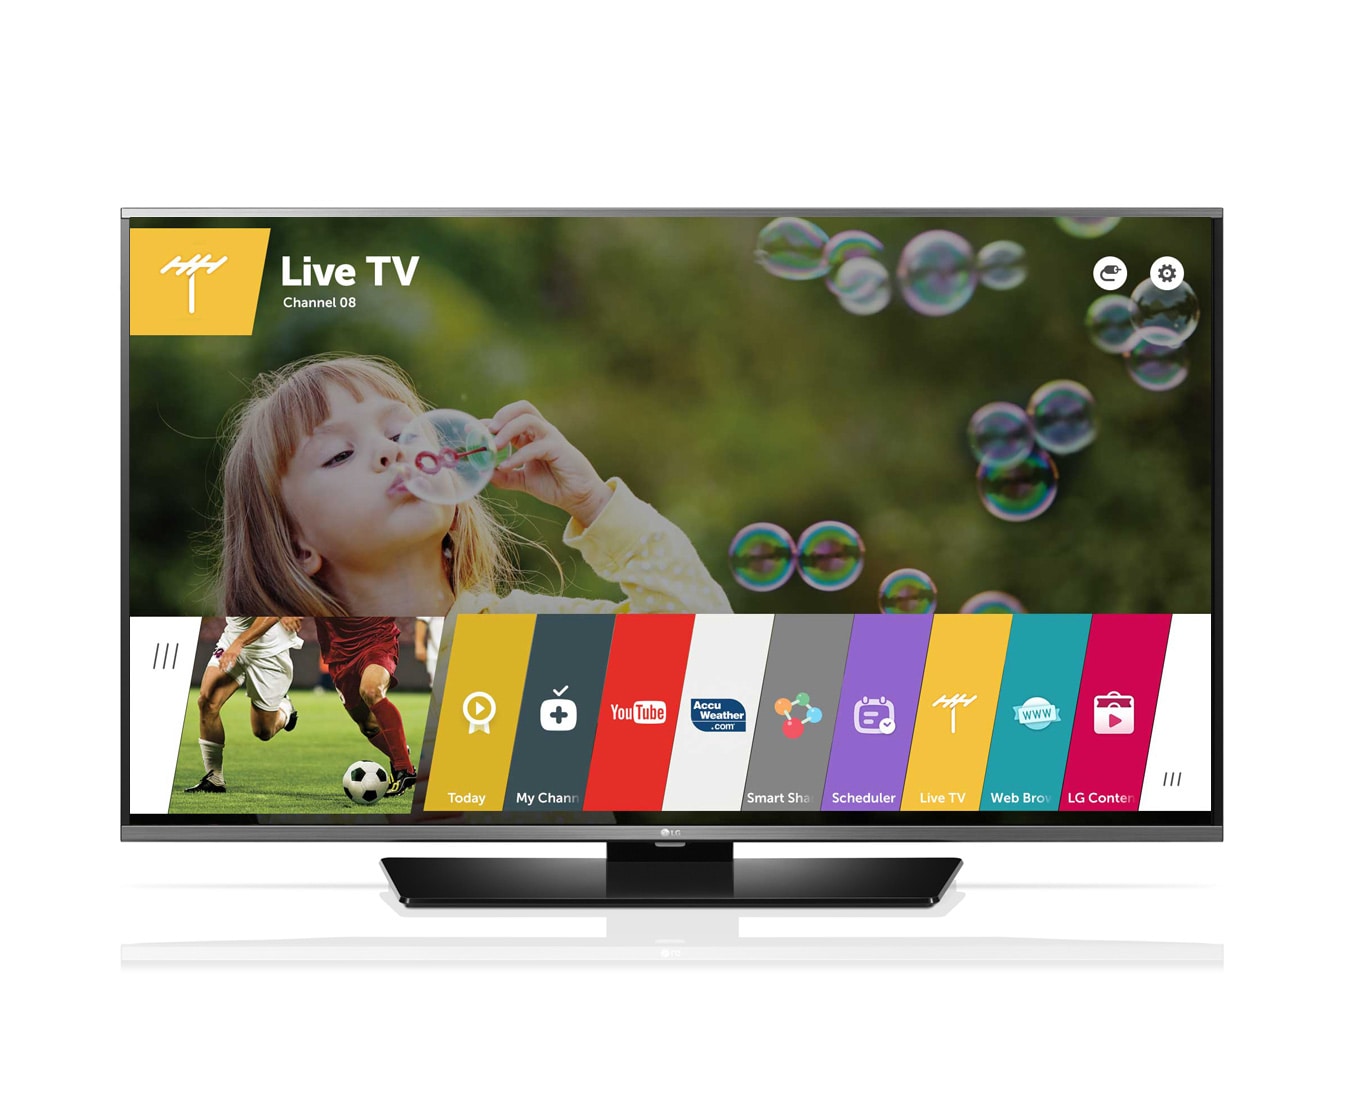 LG Smart TV with webOS 2.0, 60LF6300